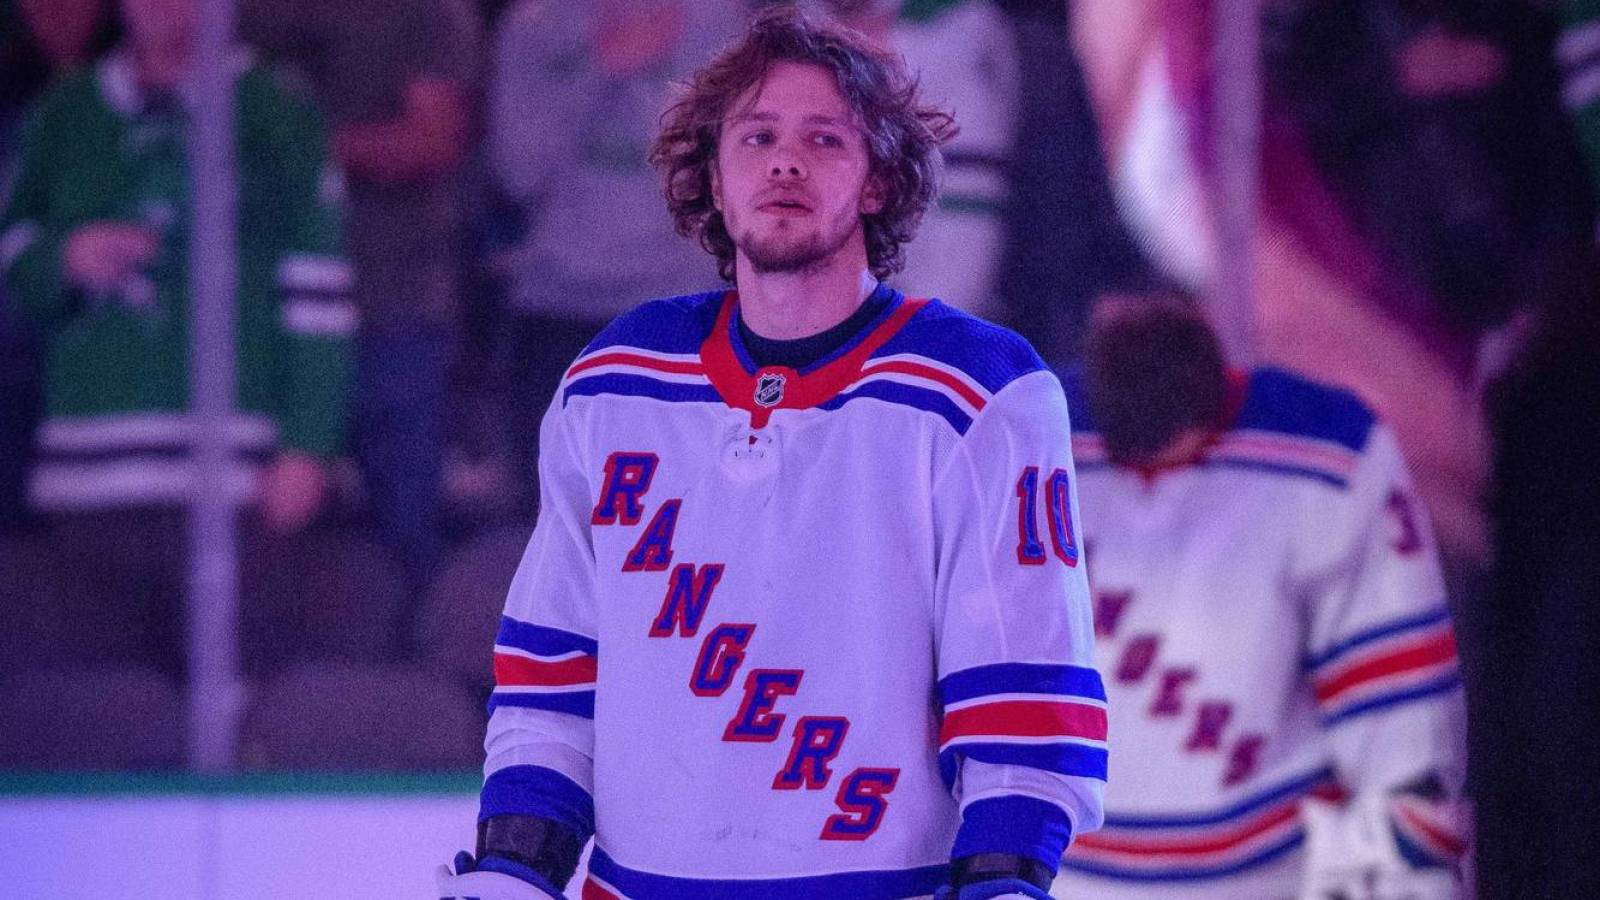 Artemi Panarin: How Russian politics led to Rangers absence